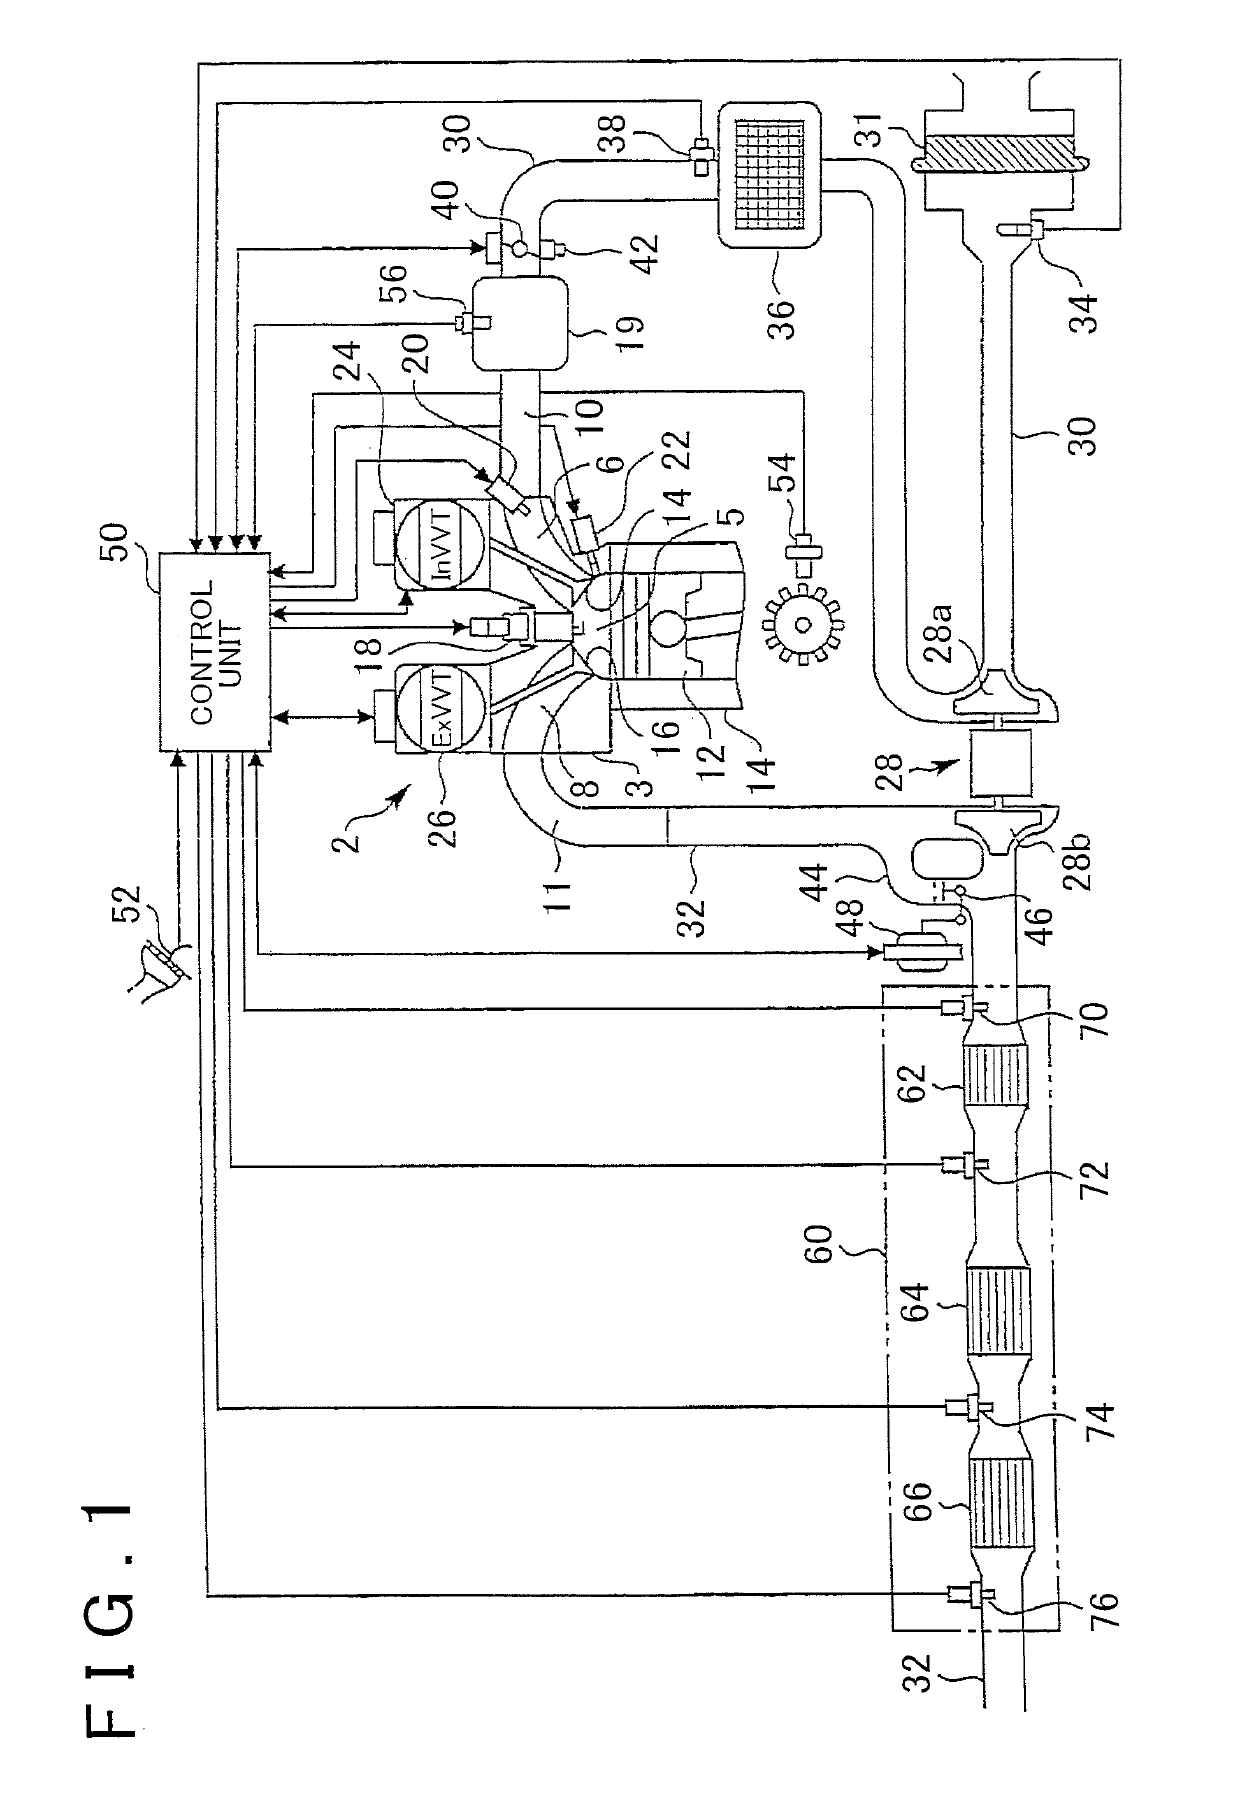 Apparatus and method for controlling an internal combustion engine